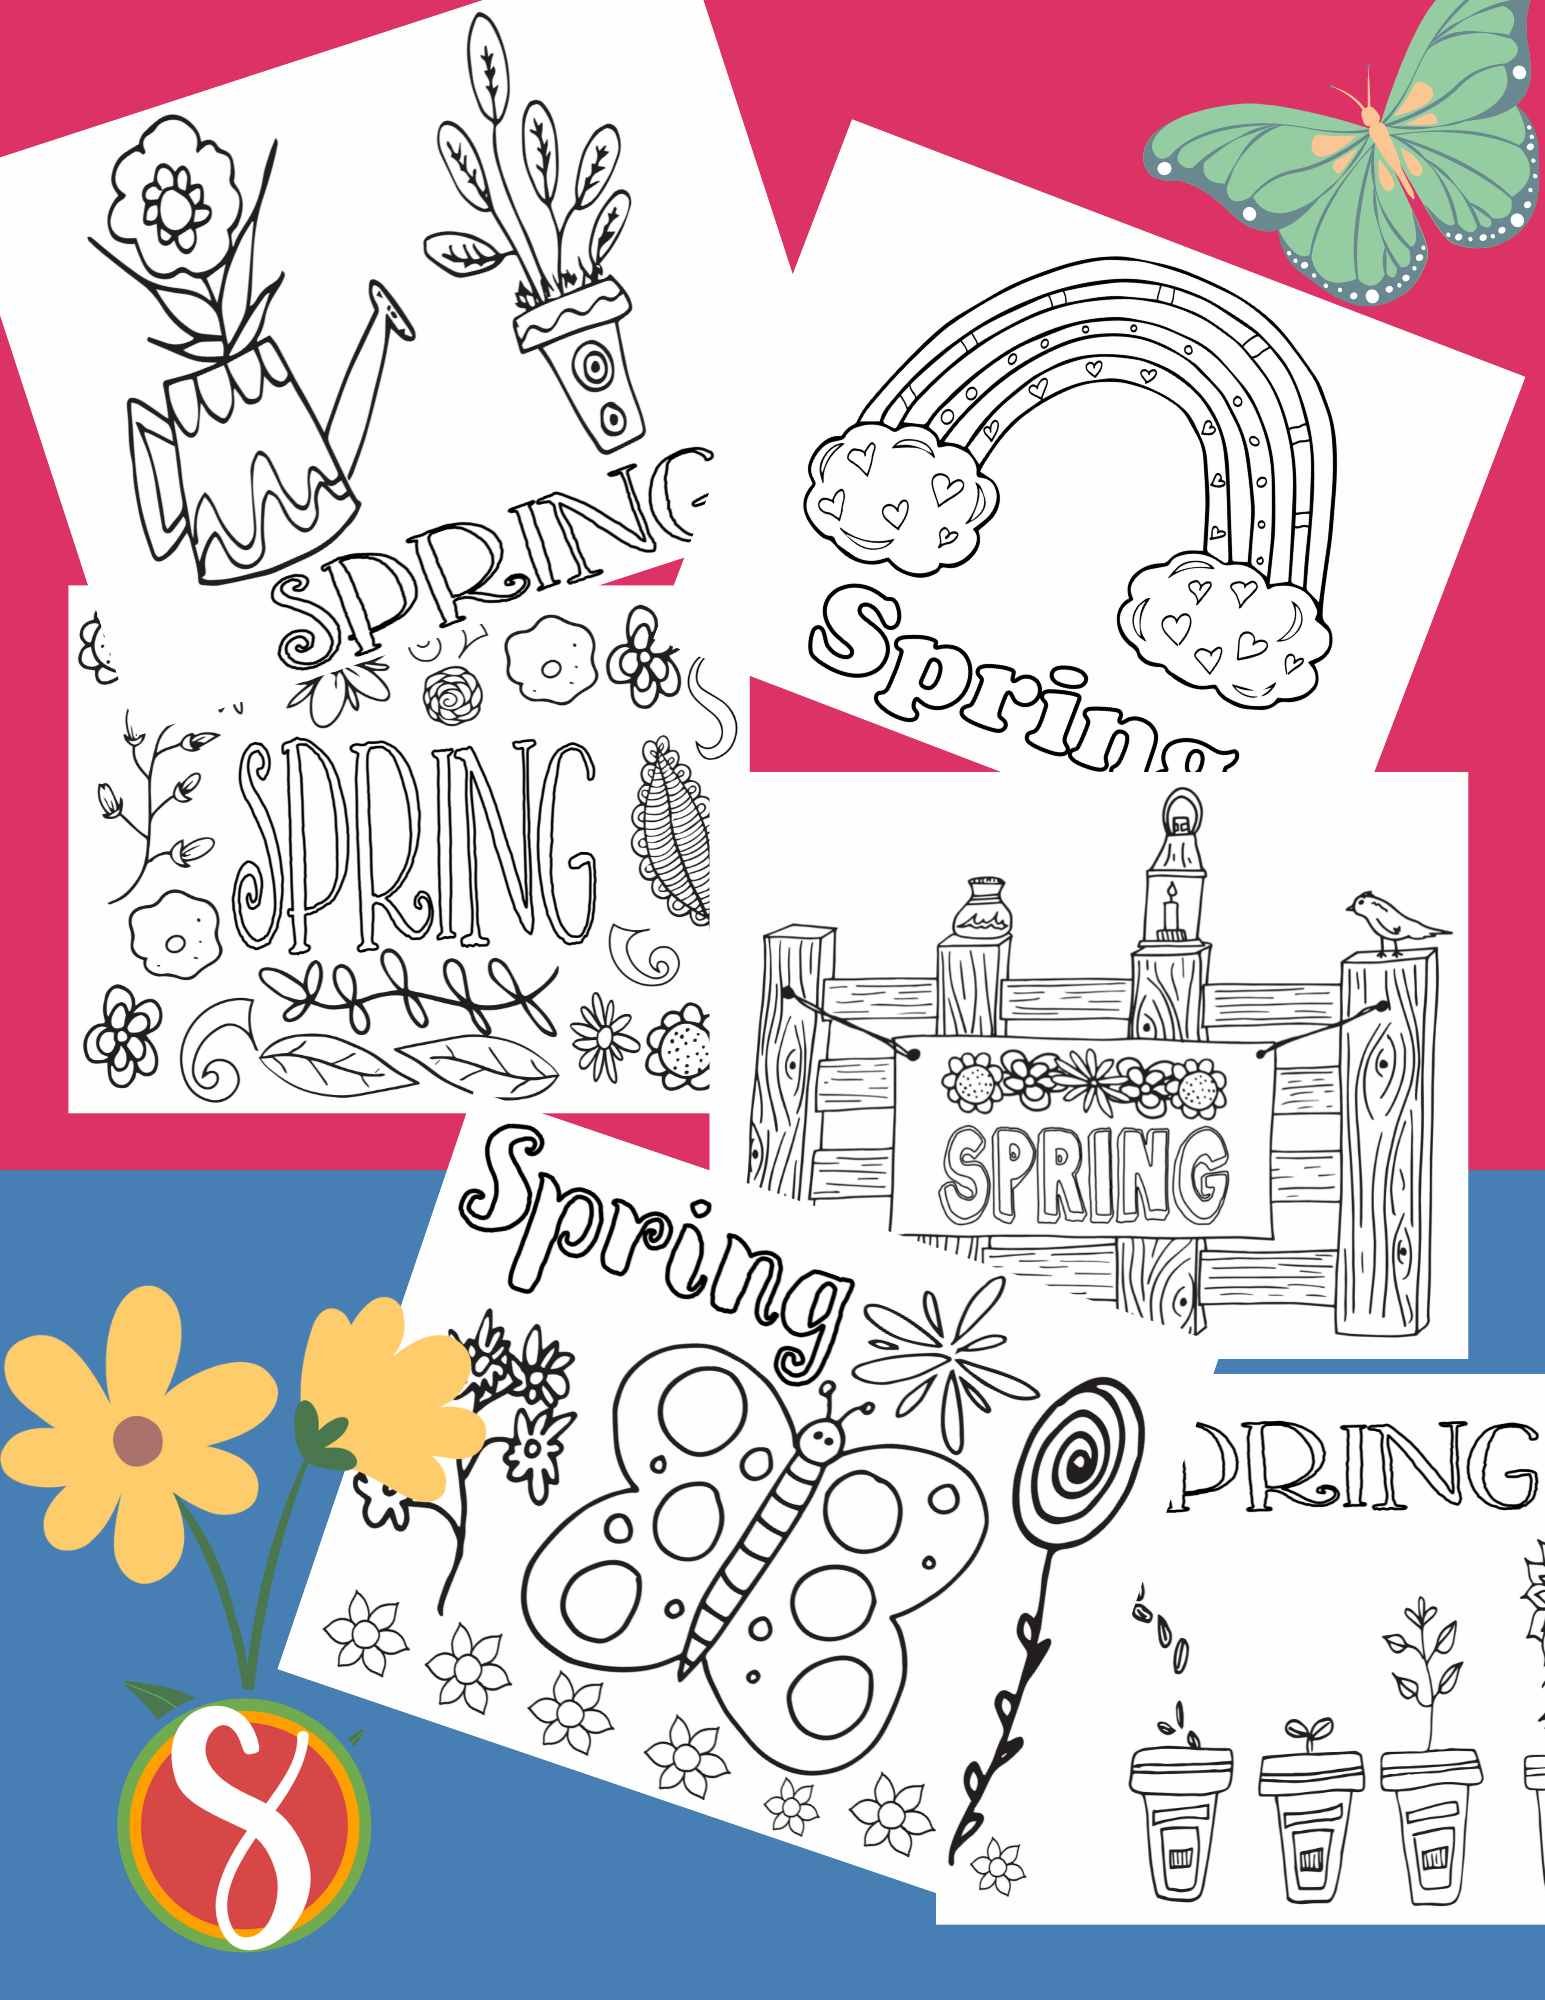 Free Printable Spring Coloring Pages For Kids  Spring coloring pages,  Spring coloring sheets, Coloring pages